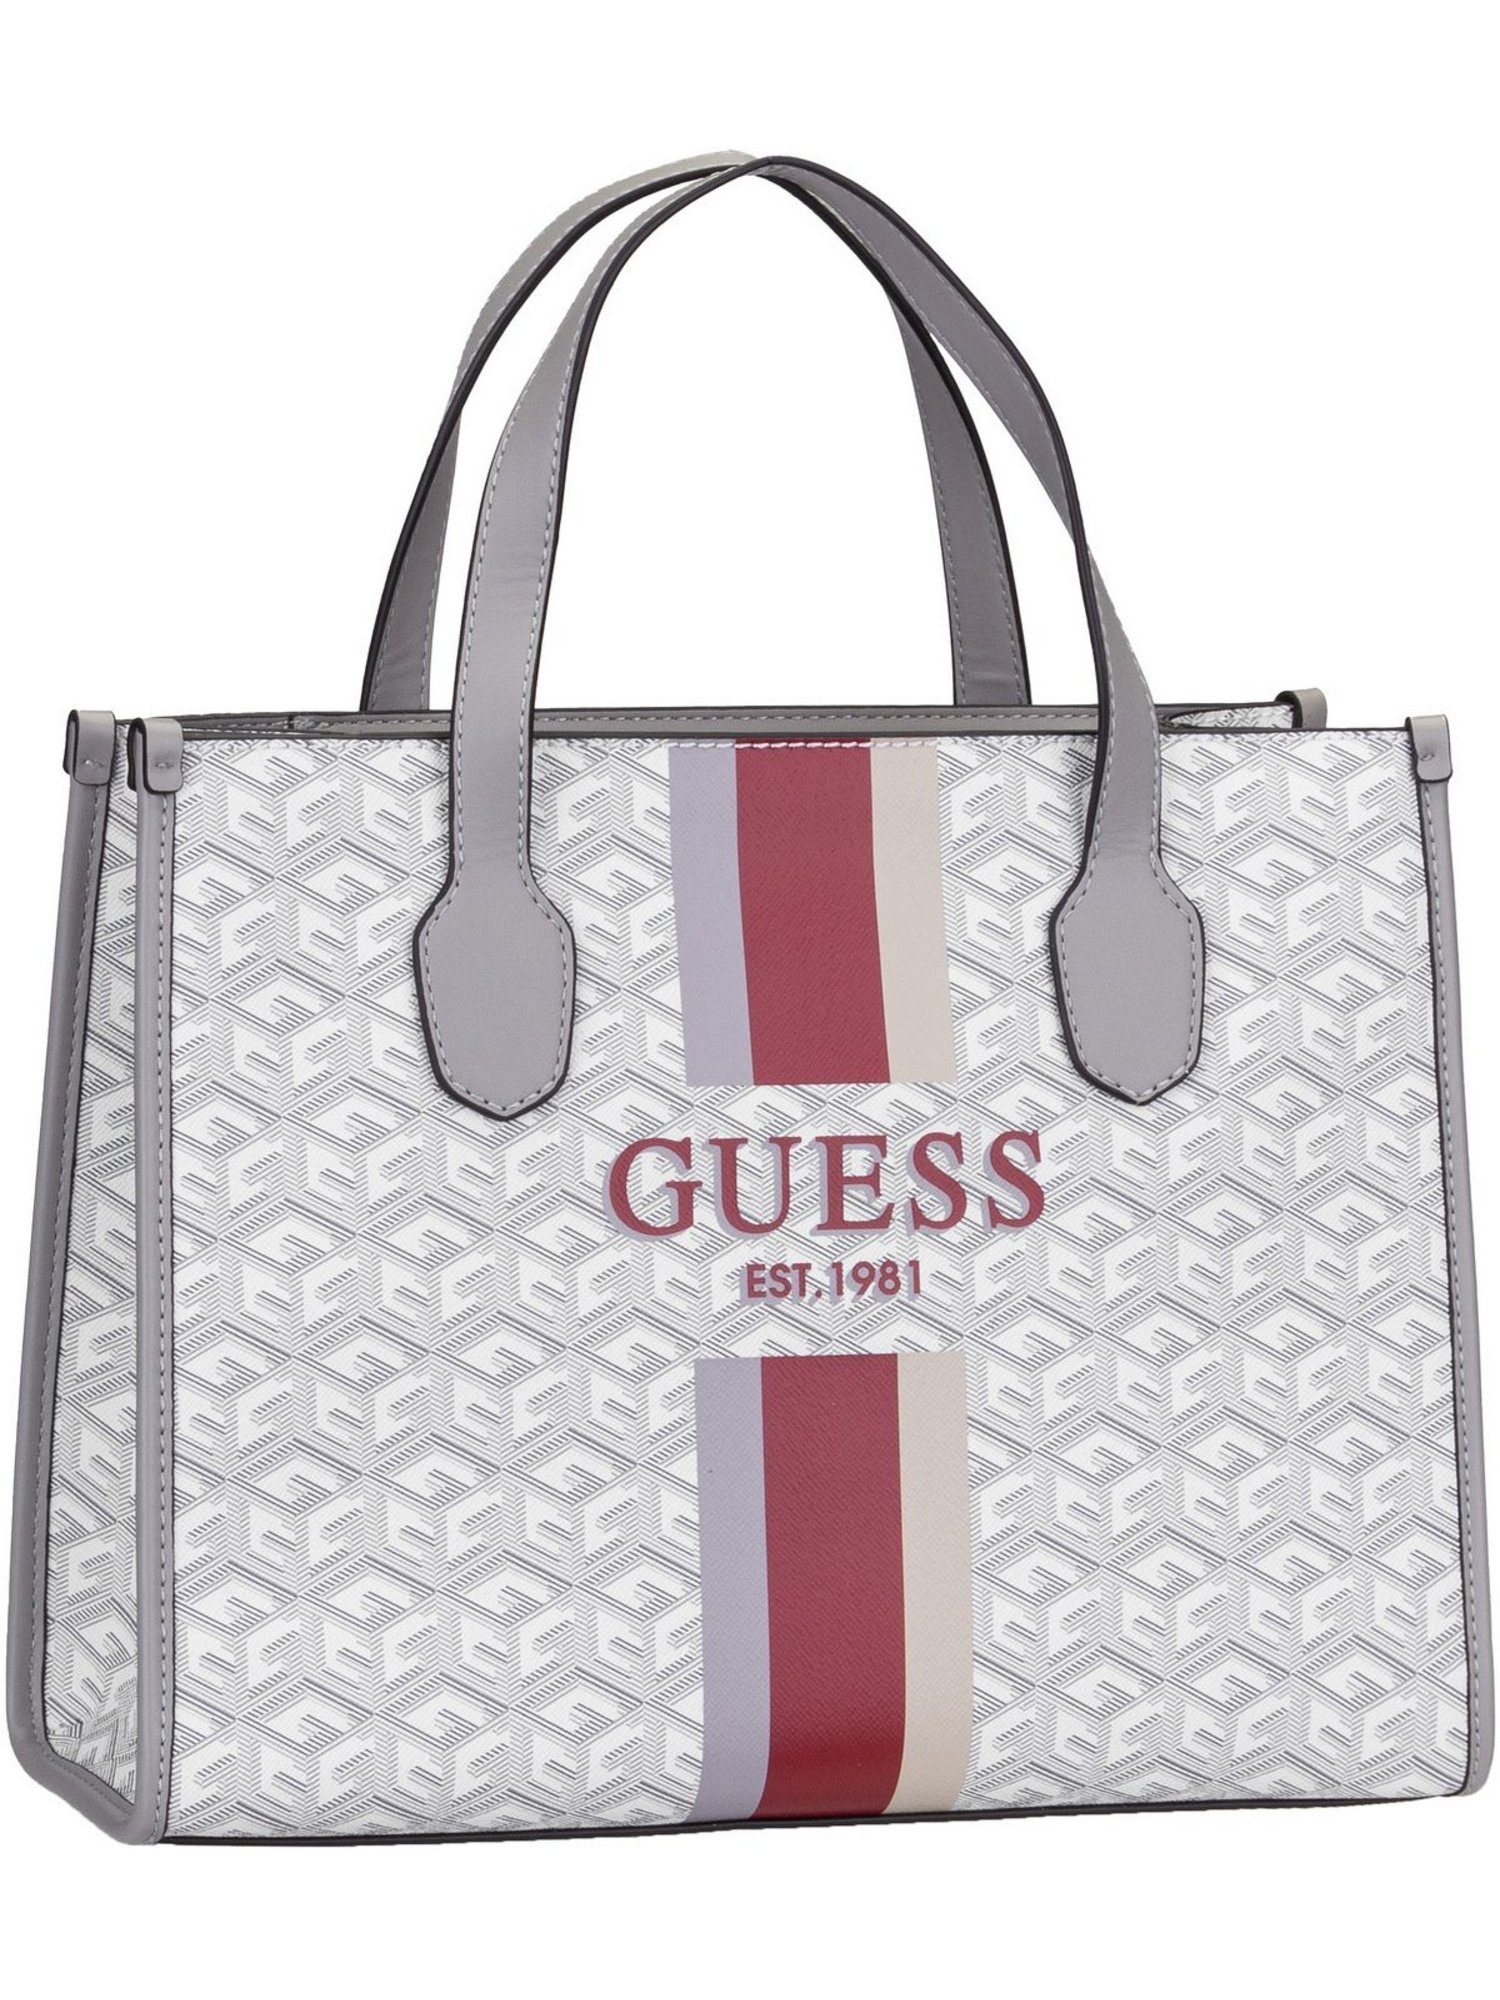 Guess Handtasche Silvana Two Compartment Tote, Tote Bag